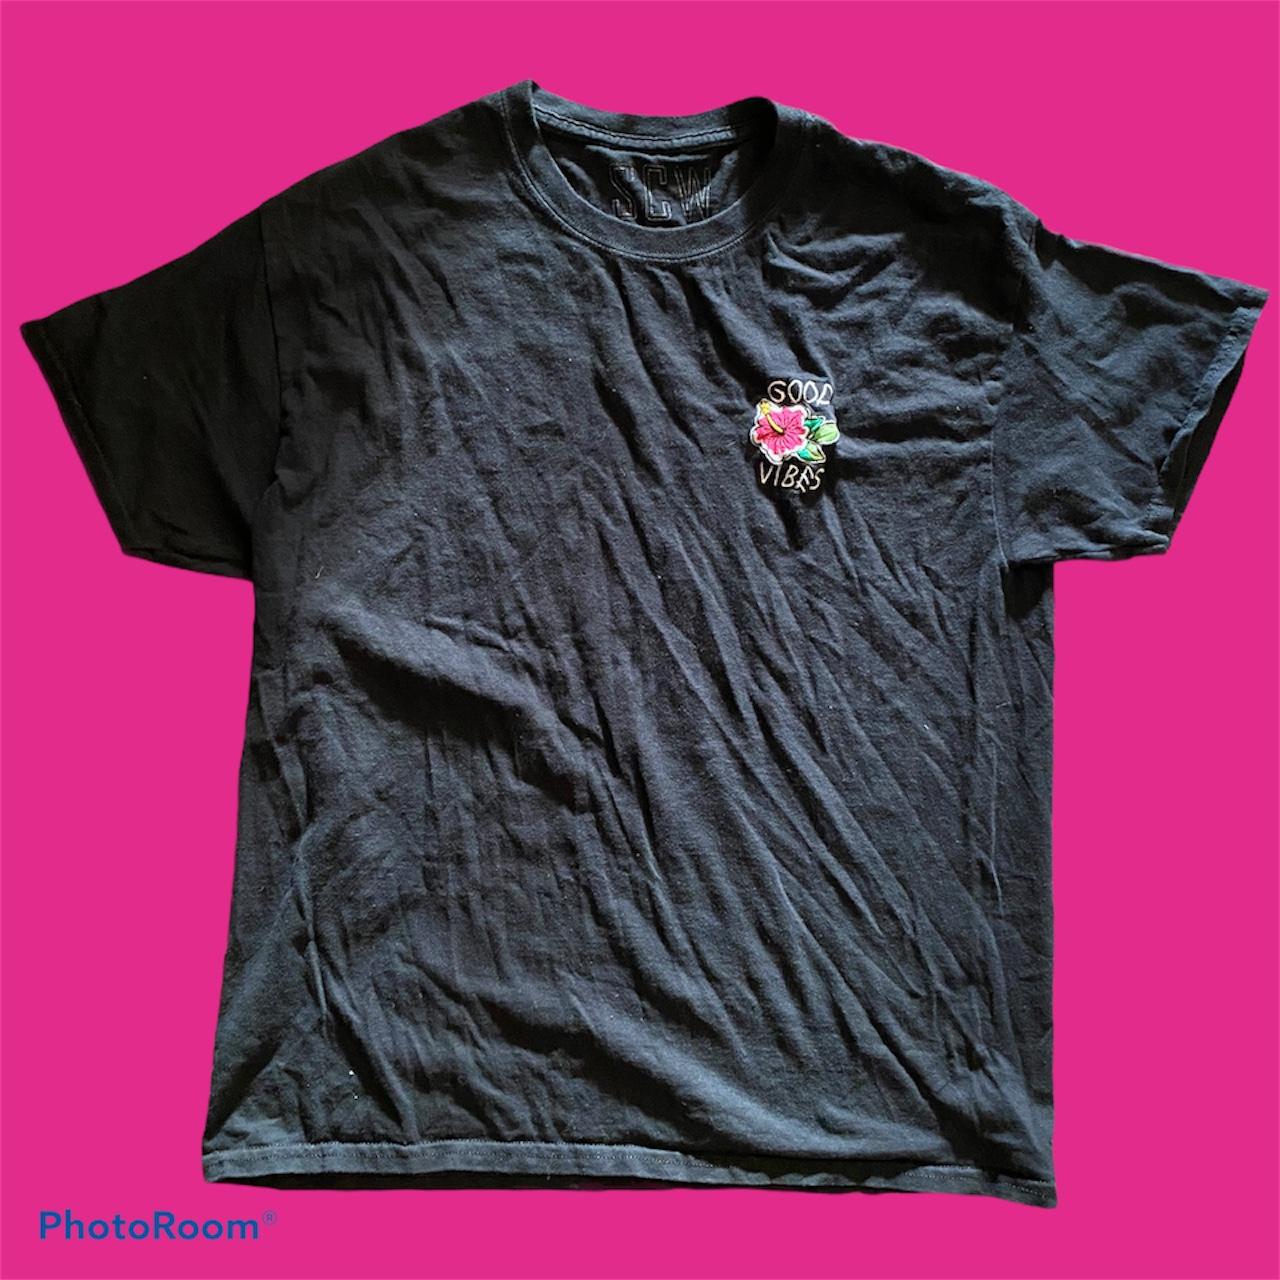 Women's Black and Pink T-shirt